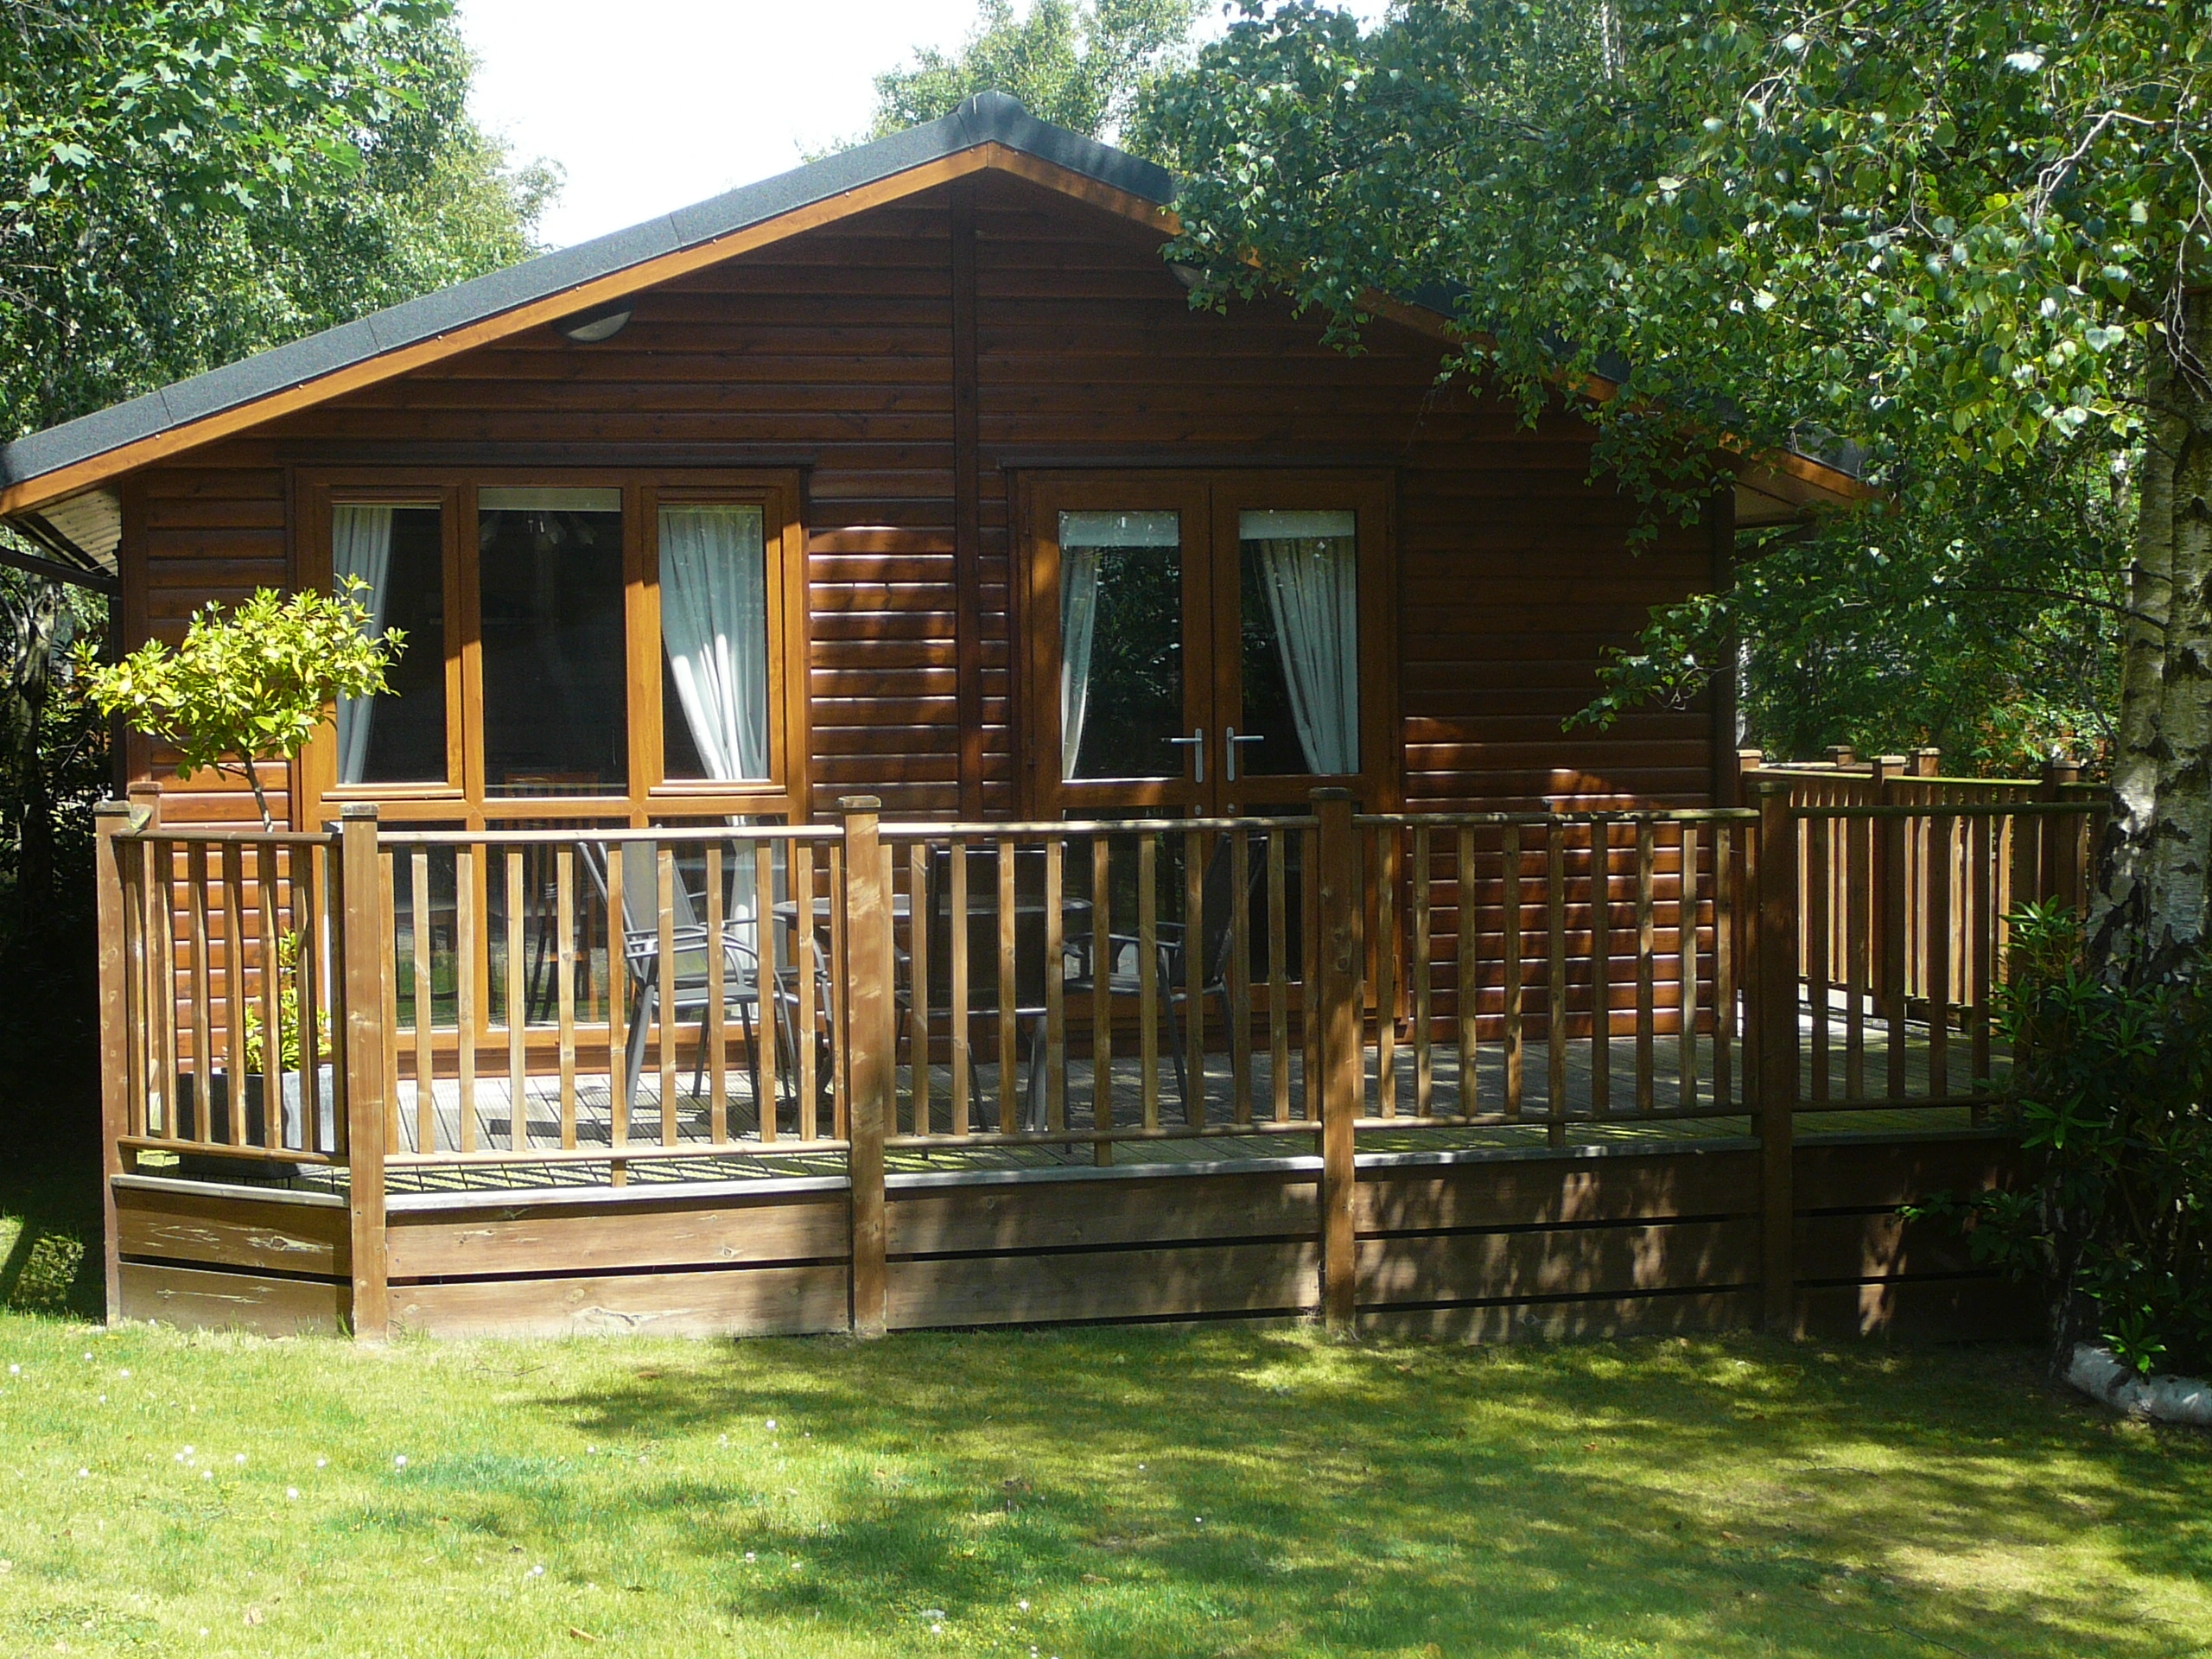 <FONT color=#99ff66 size=6 face=Arial>Kingfisher Retreat and The Keepers Lodge Warmwell</FONT>